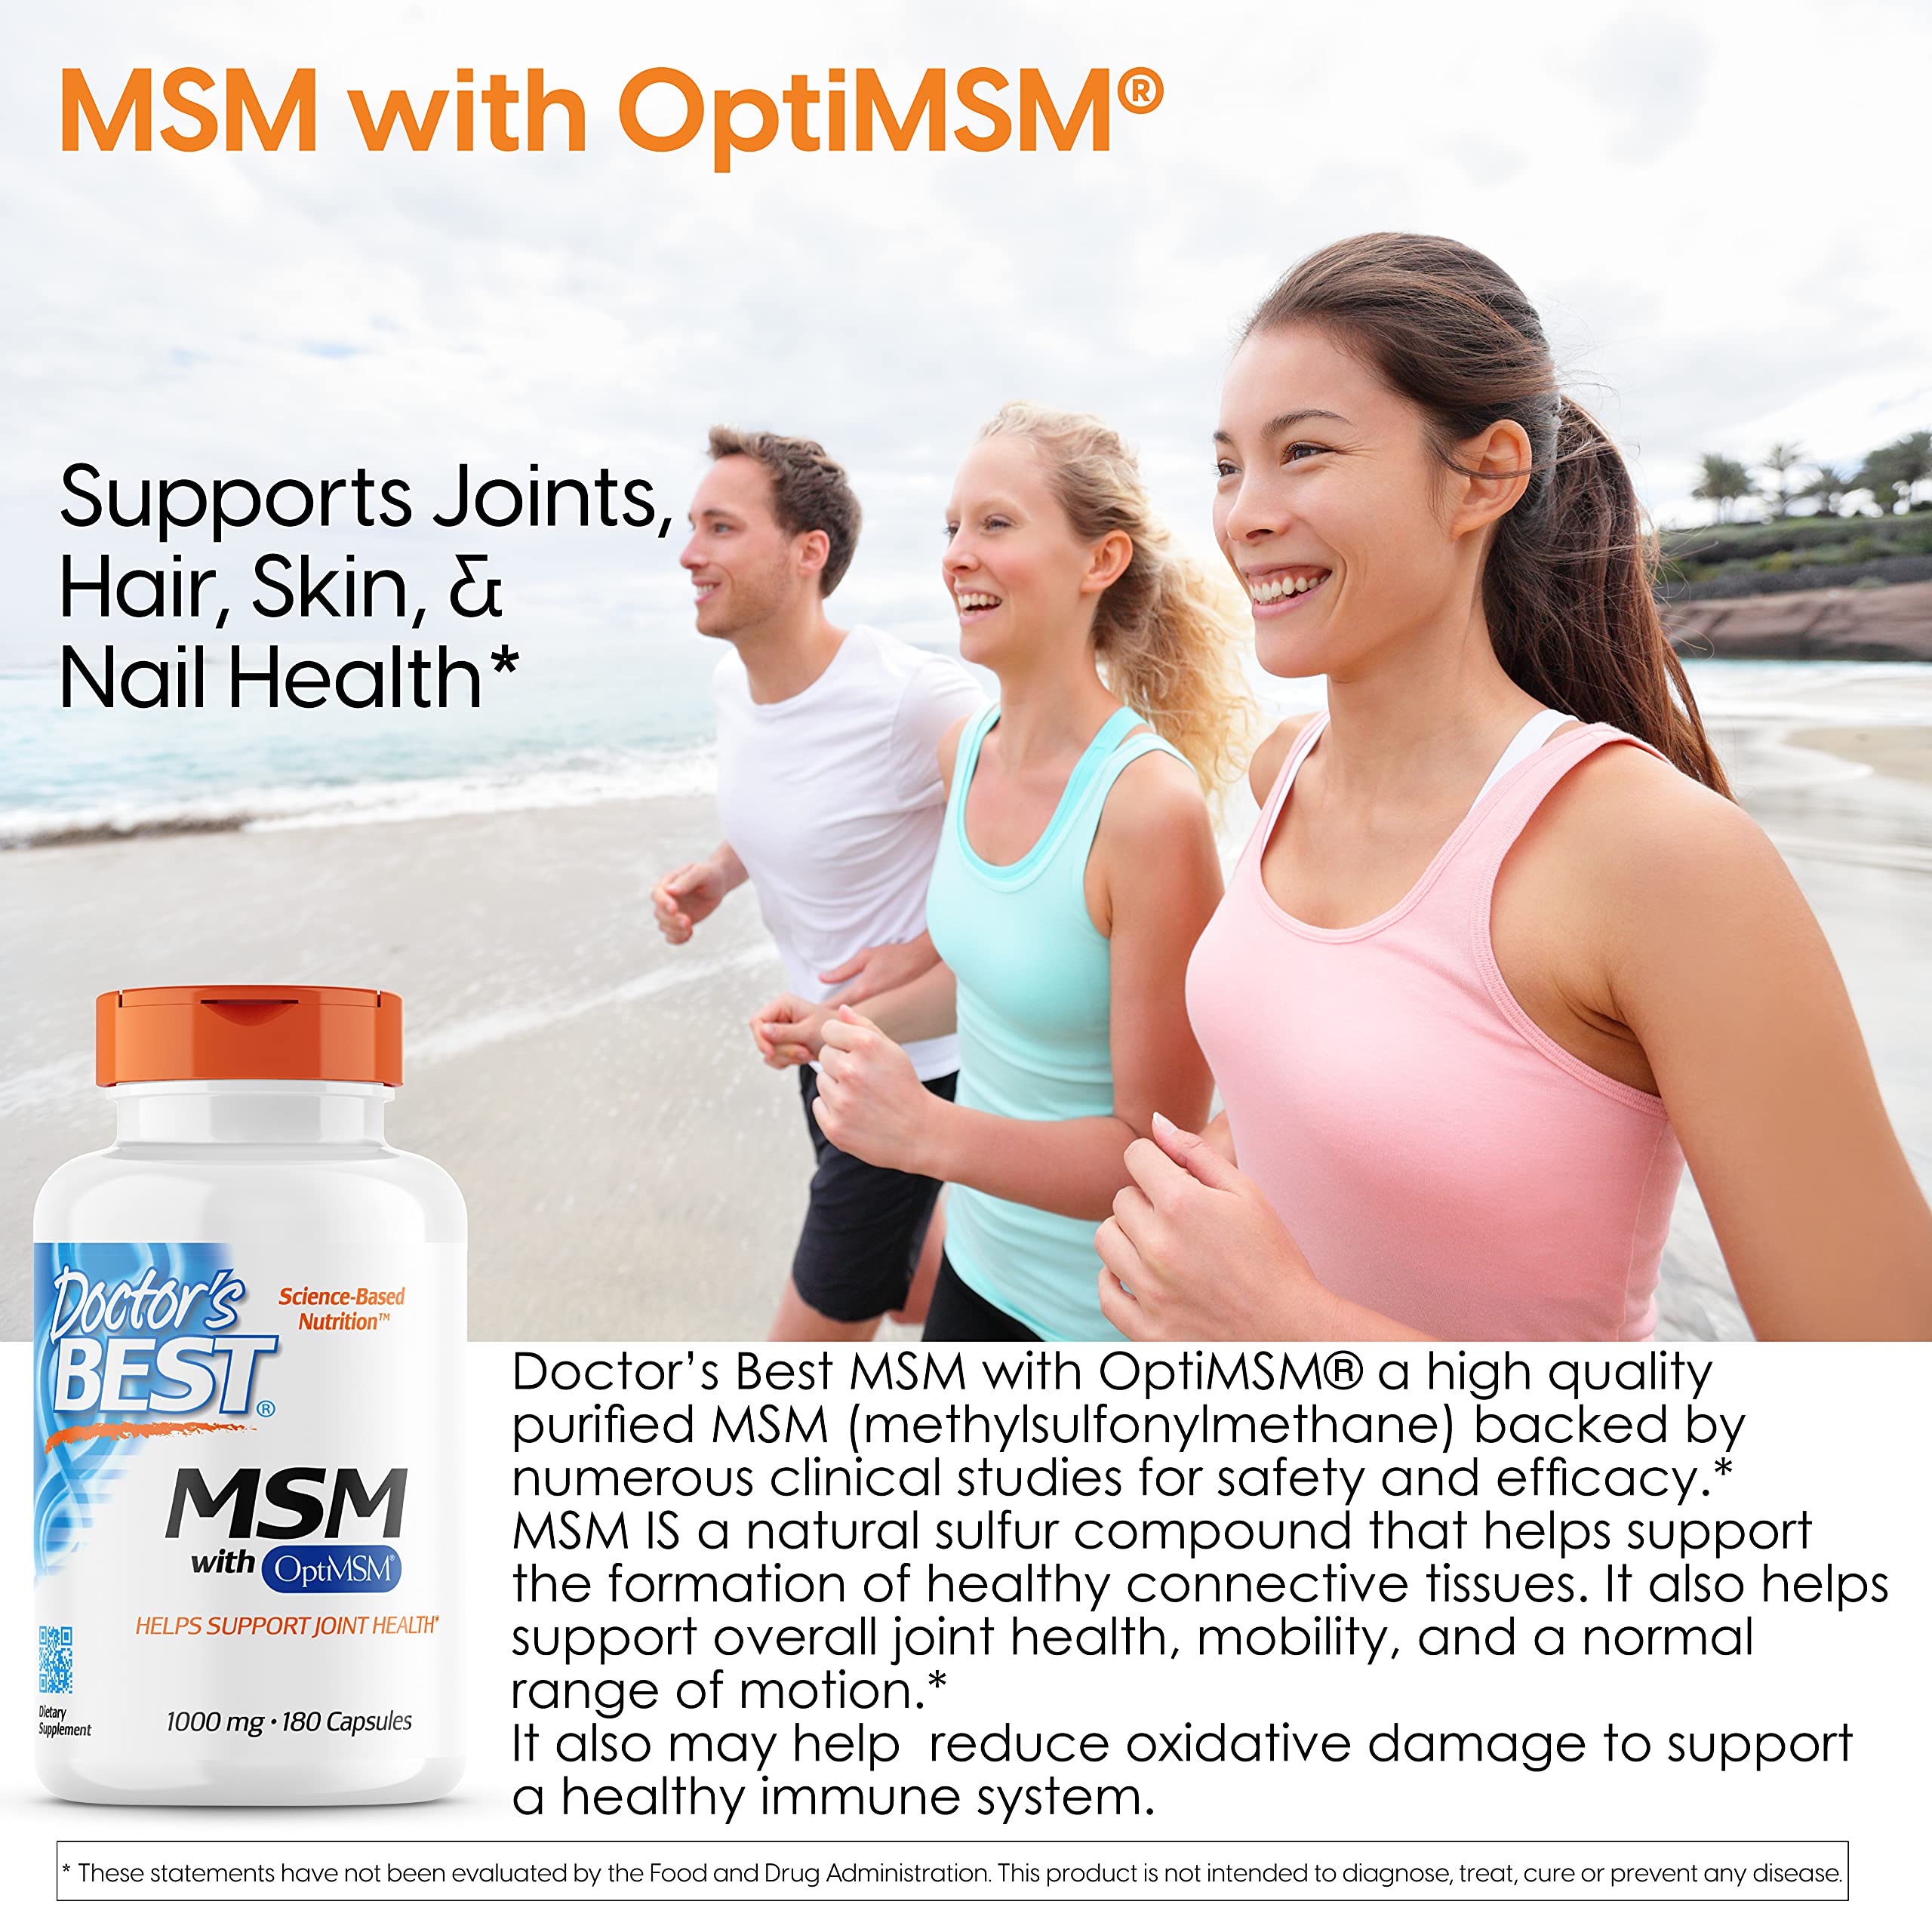 Doctor's Best MSM with OptiMSM, Joint Support, Immune System, Antioxidant and Protein-Building Role, Non-GMO, Gluten Free, 1000 mg, 180 Caps (DRB-00064)